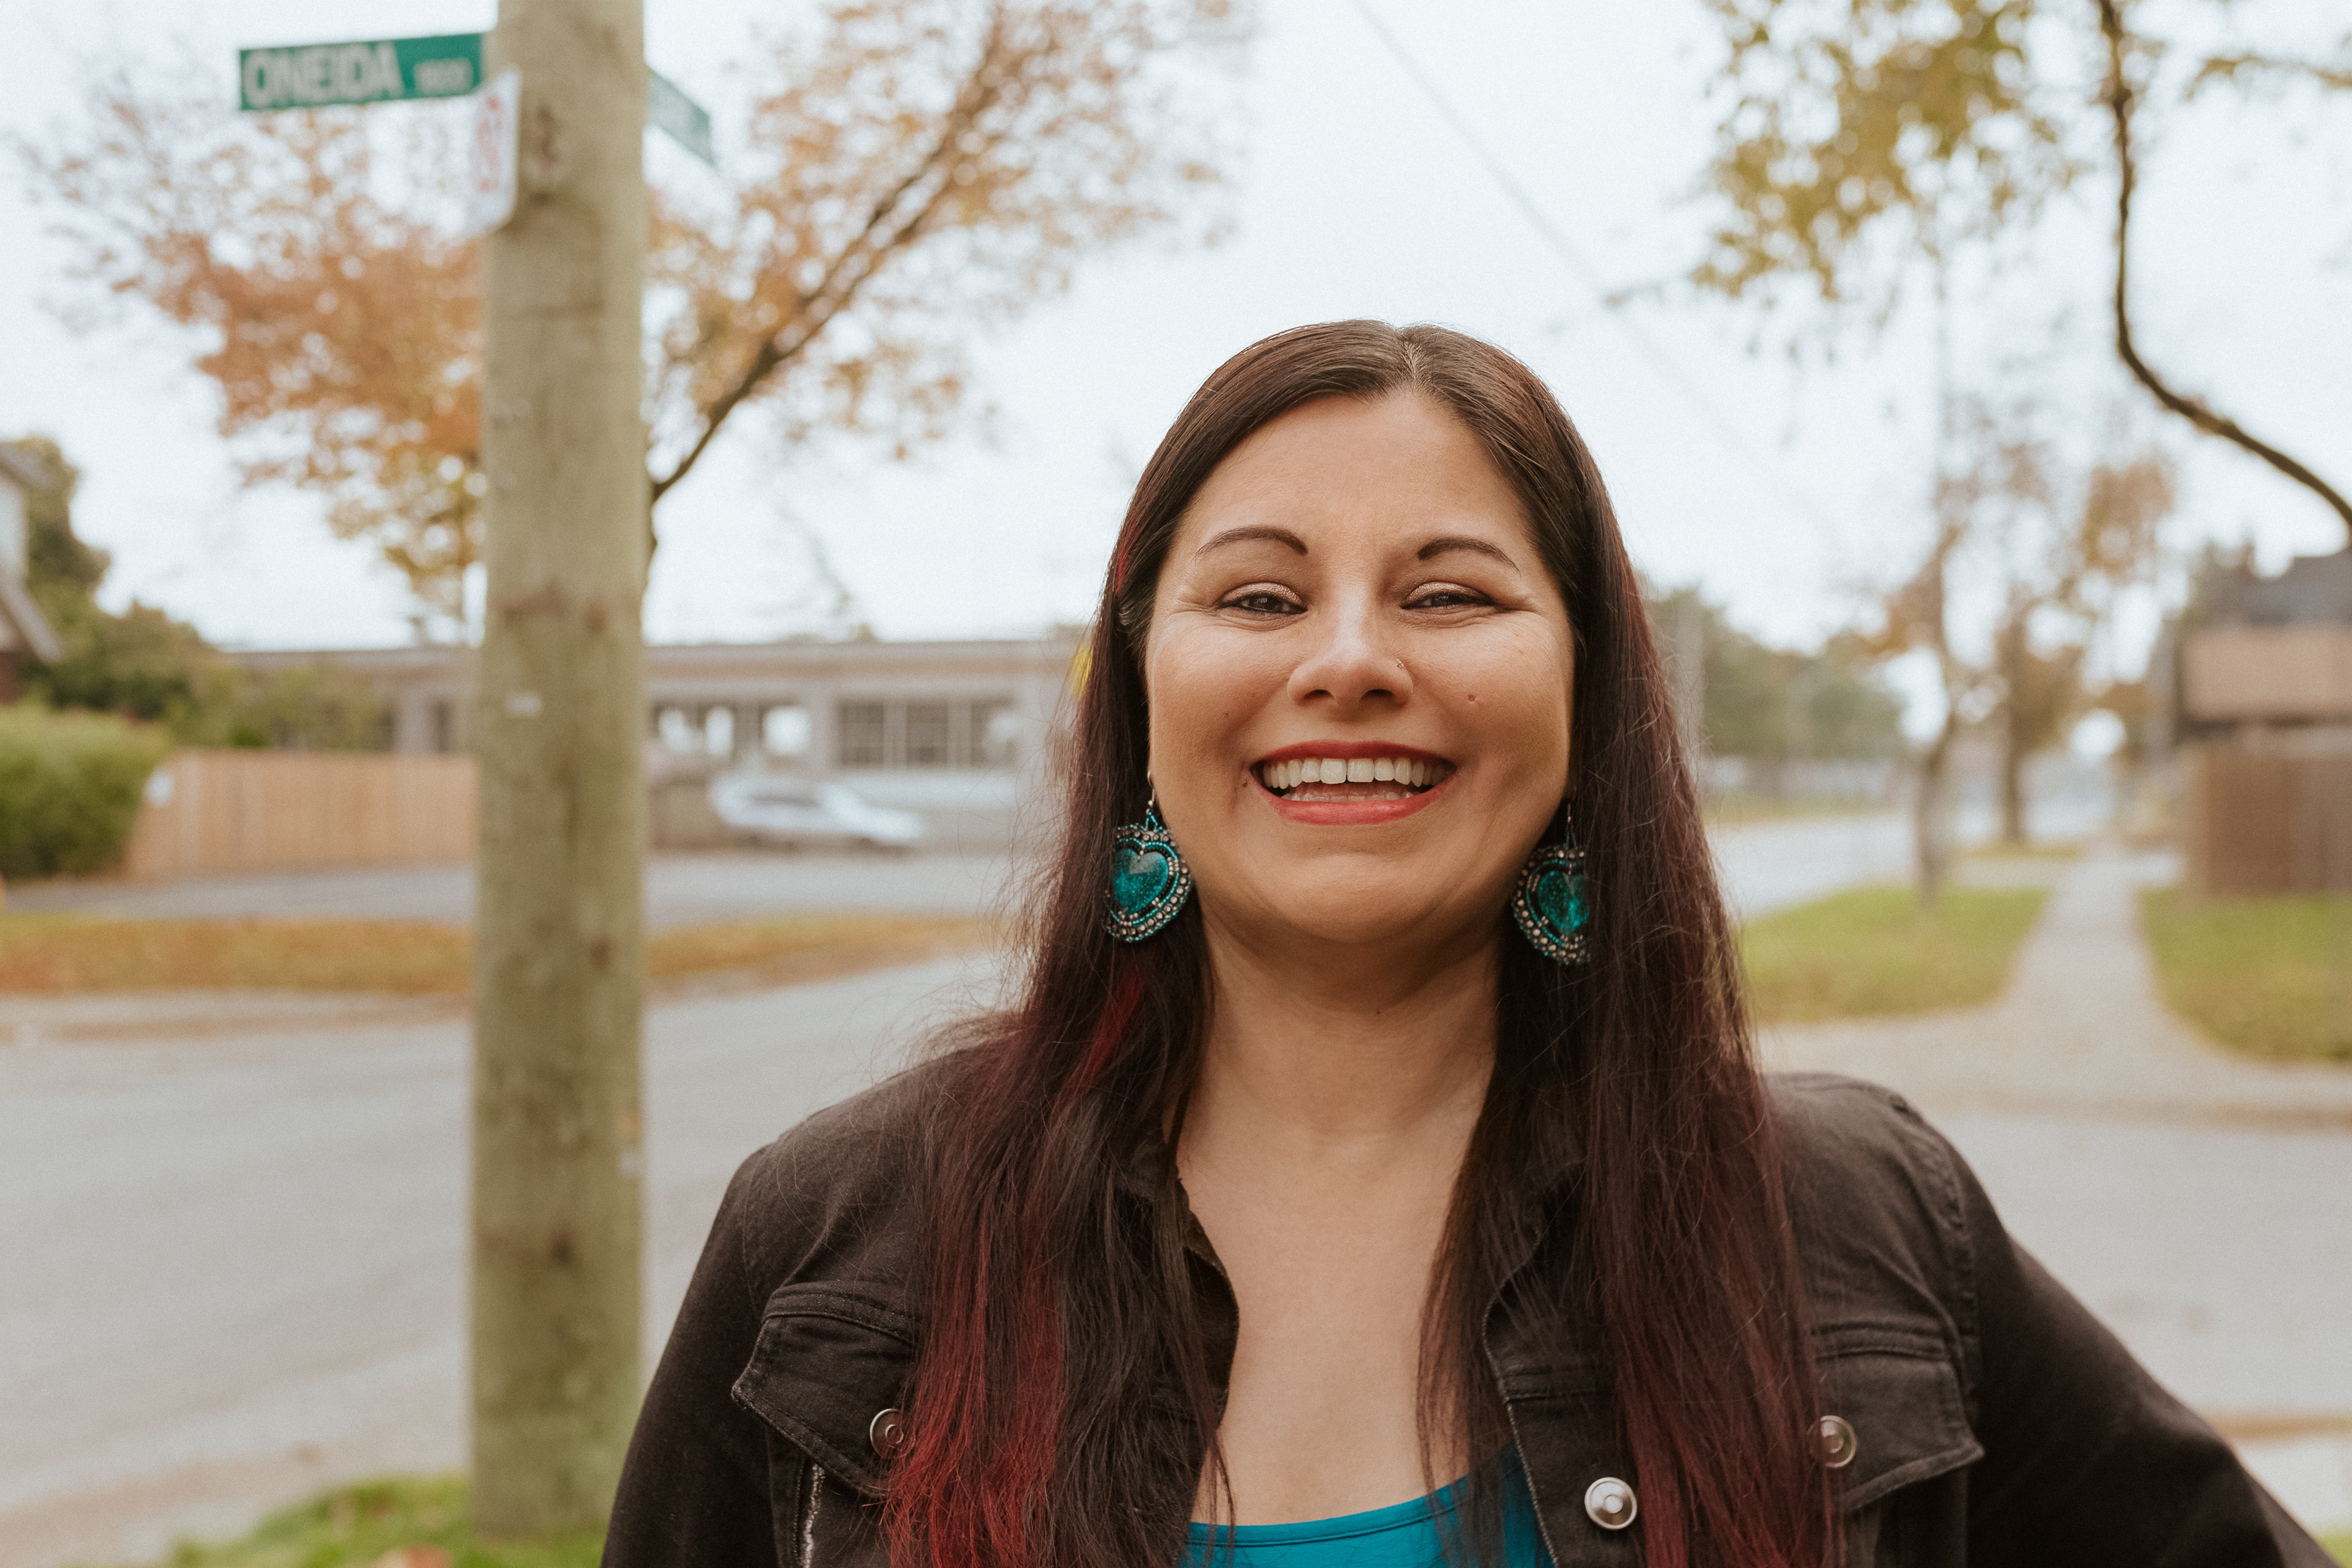 My name is Angela John and I'm from Onedia Nation, and I am Bear Clan, and I think that it’s important to represent where you are from. For your identity as a people, and to maintain heritage, culture, and language to pass on to the next generation.